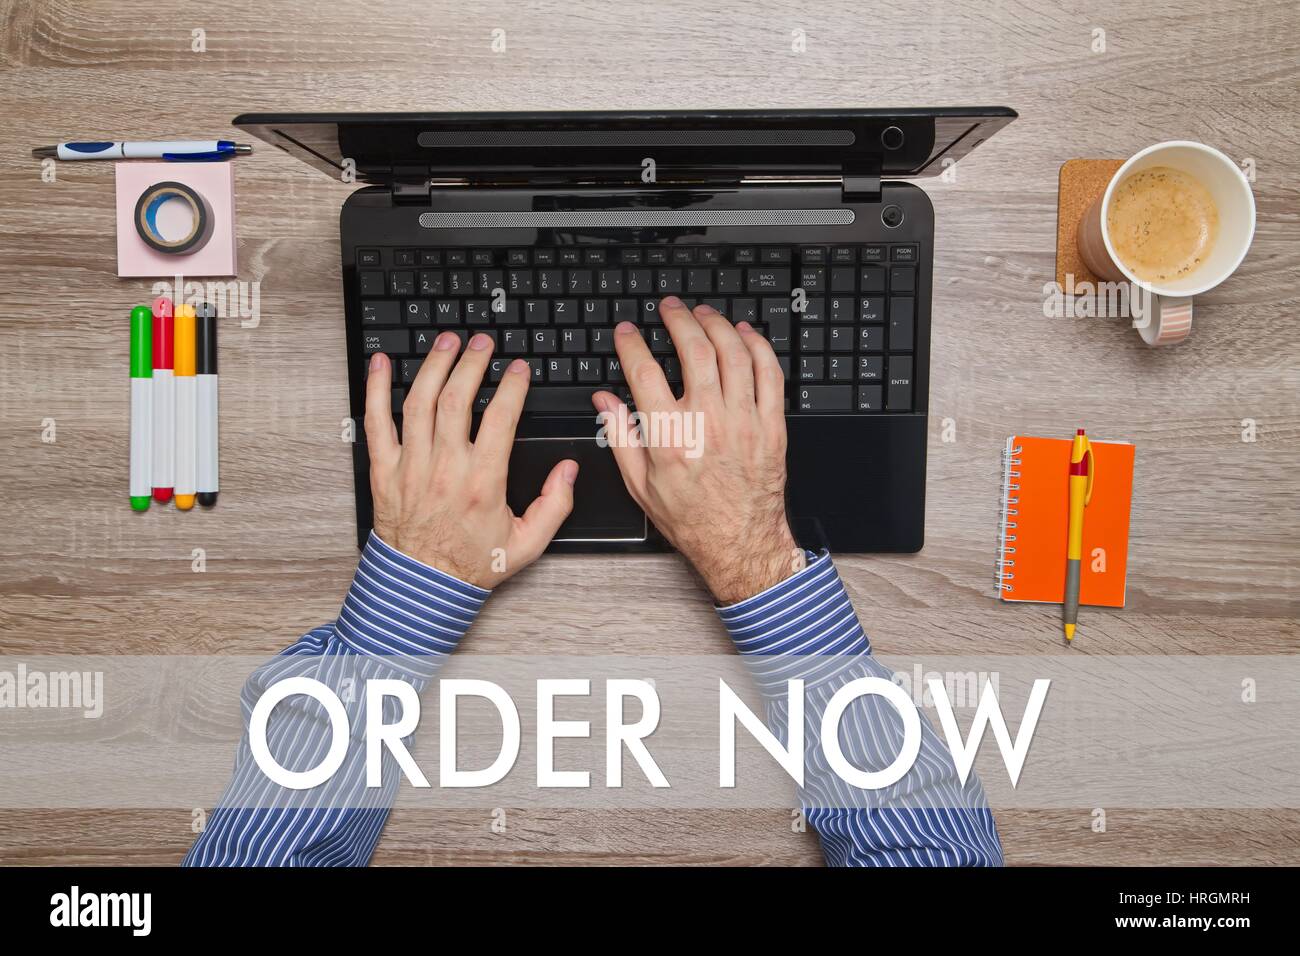 Male hand typing on laptop, message Stock Photo